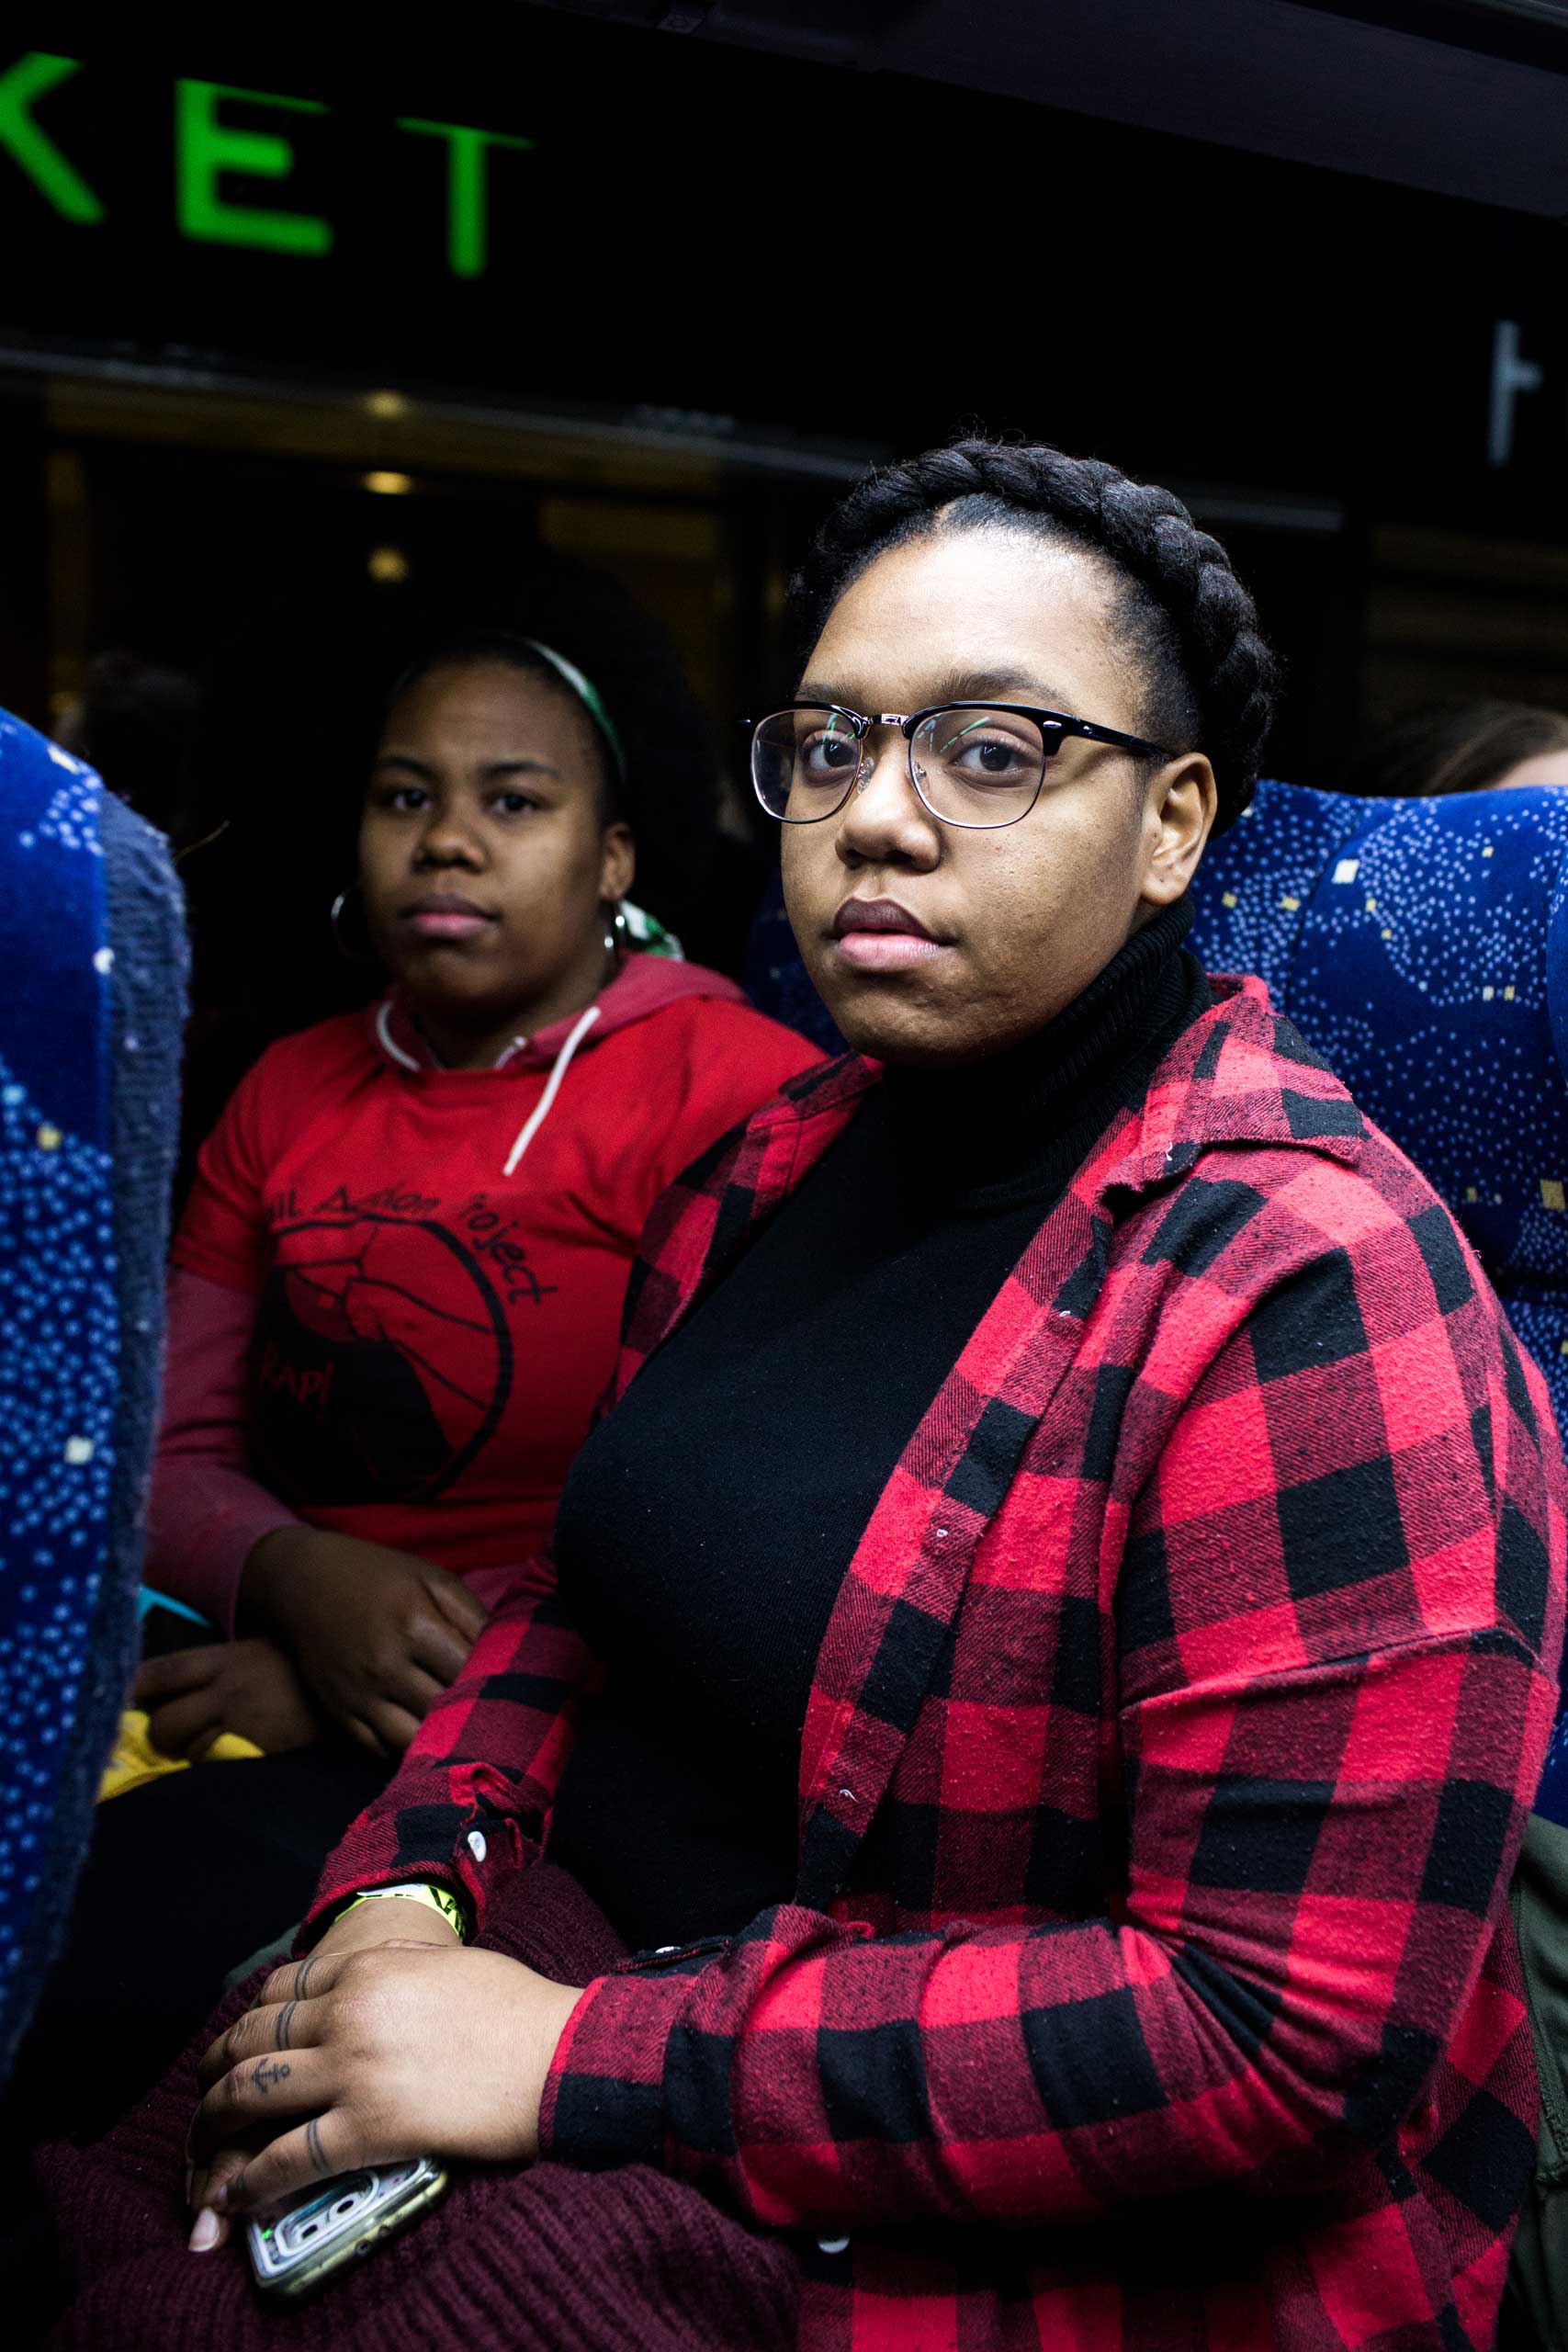 1:40 AM: Lysondra Webb, 25, (right) and Sade Dixon, 25, (left) pose for a portrait on the bus. As a member of a marginalized community I'm obligated to be a representative," Lysondra tells me. "That person who's going to be sitting in the White House and all his cronies are not for me." "My grandparents protested with Malcolm X for me to have a better life. It's my duty to continue the fight and its' sad that I have to but I will fight and speak up for my brothers and my community," says Dixon.